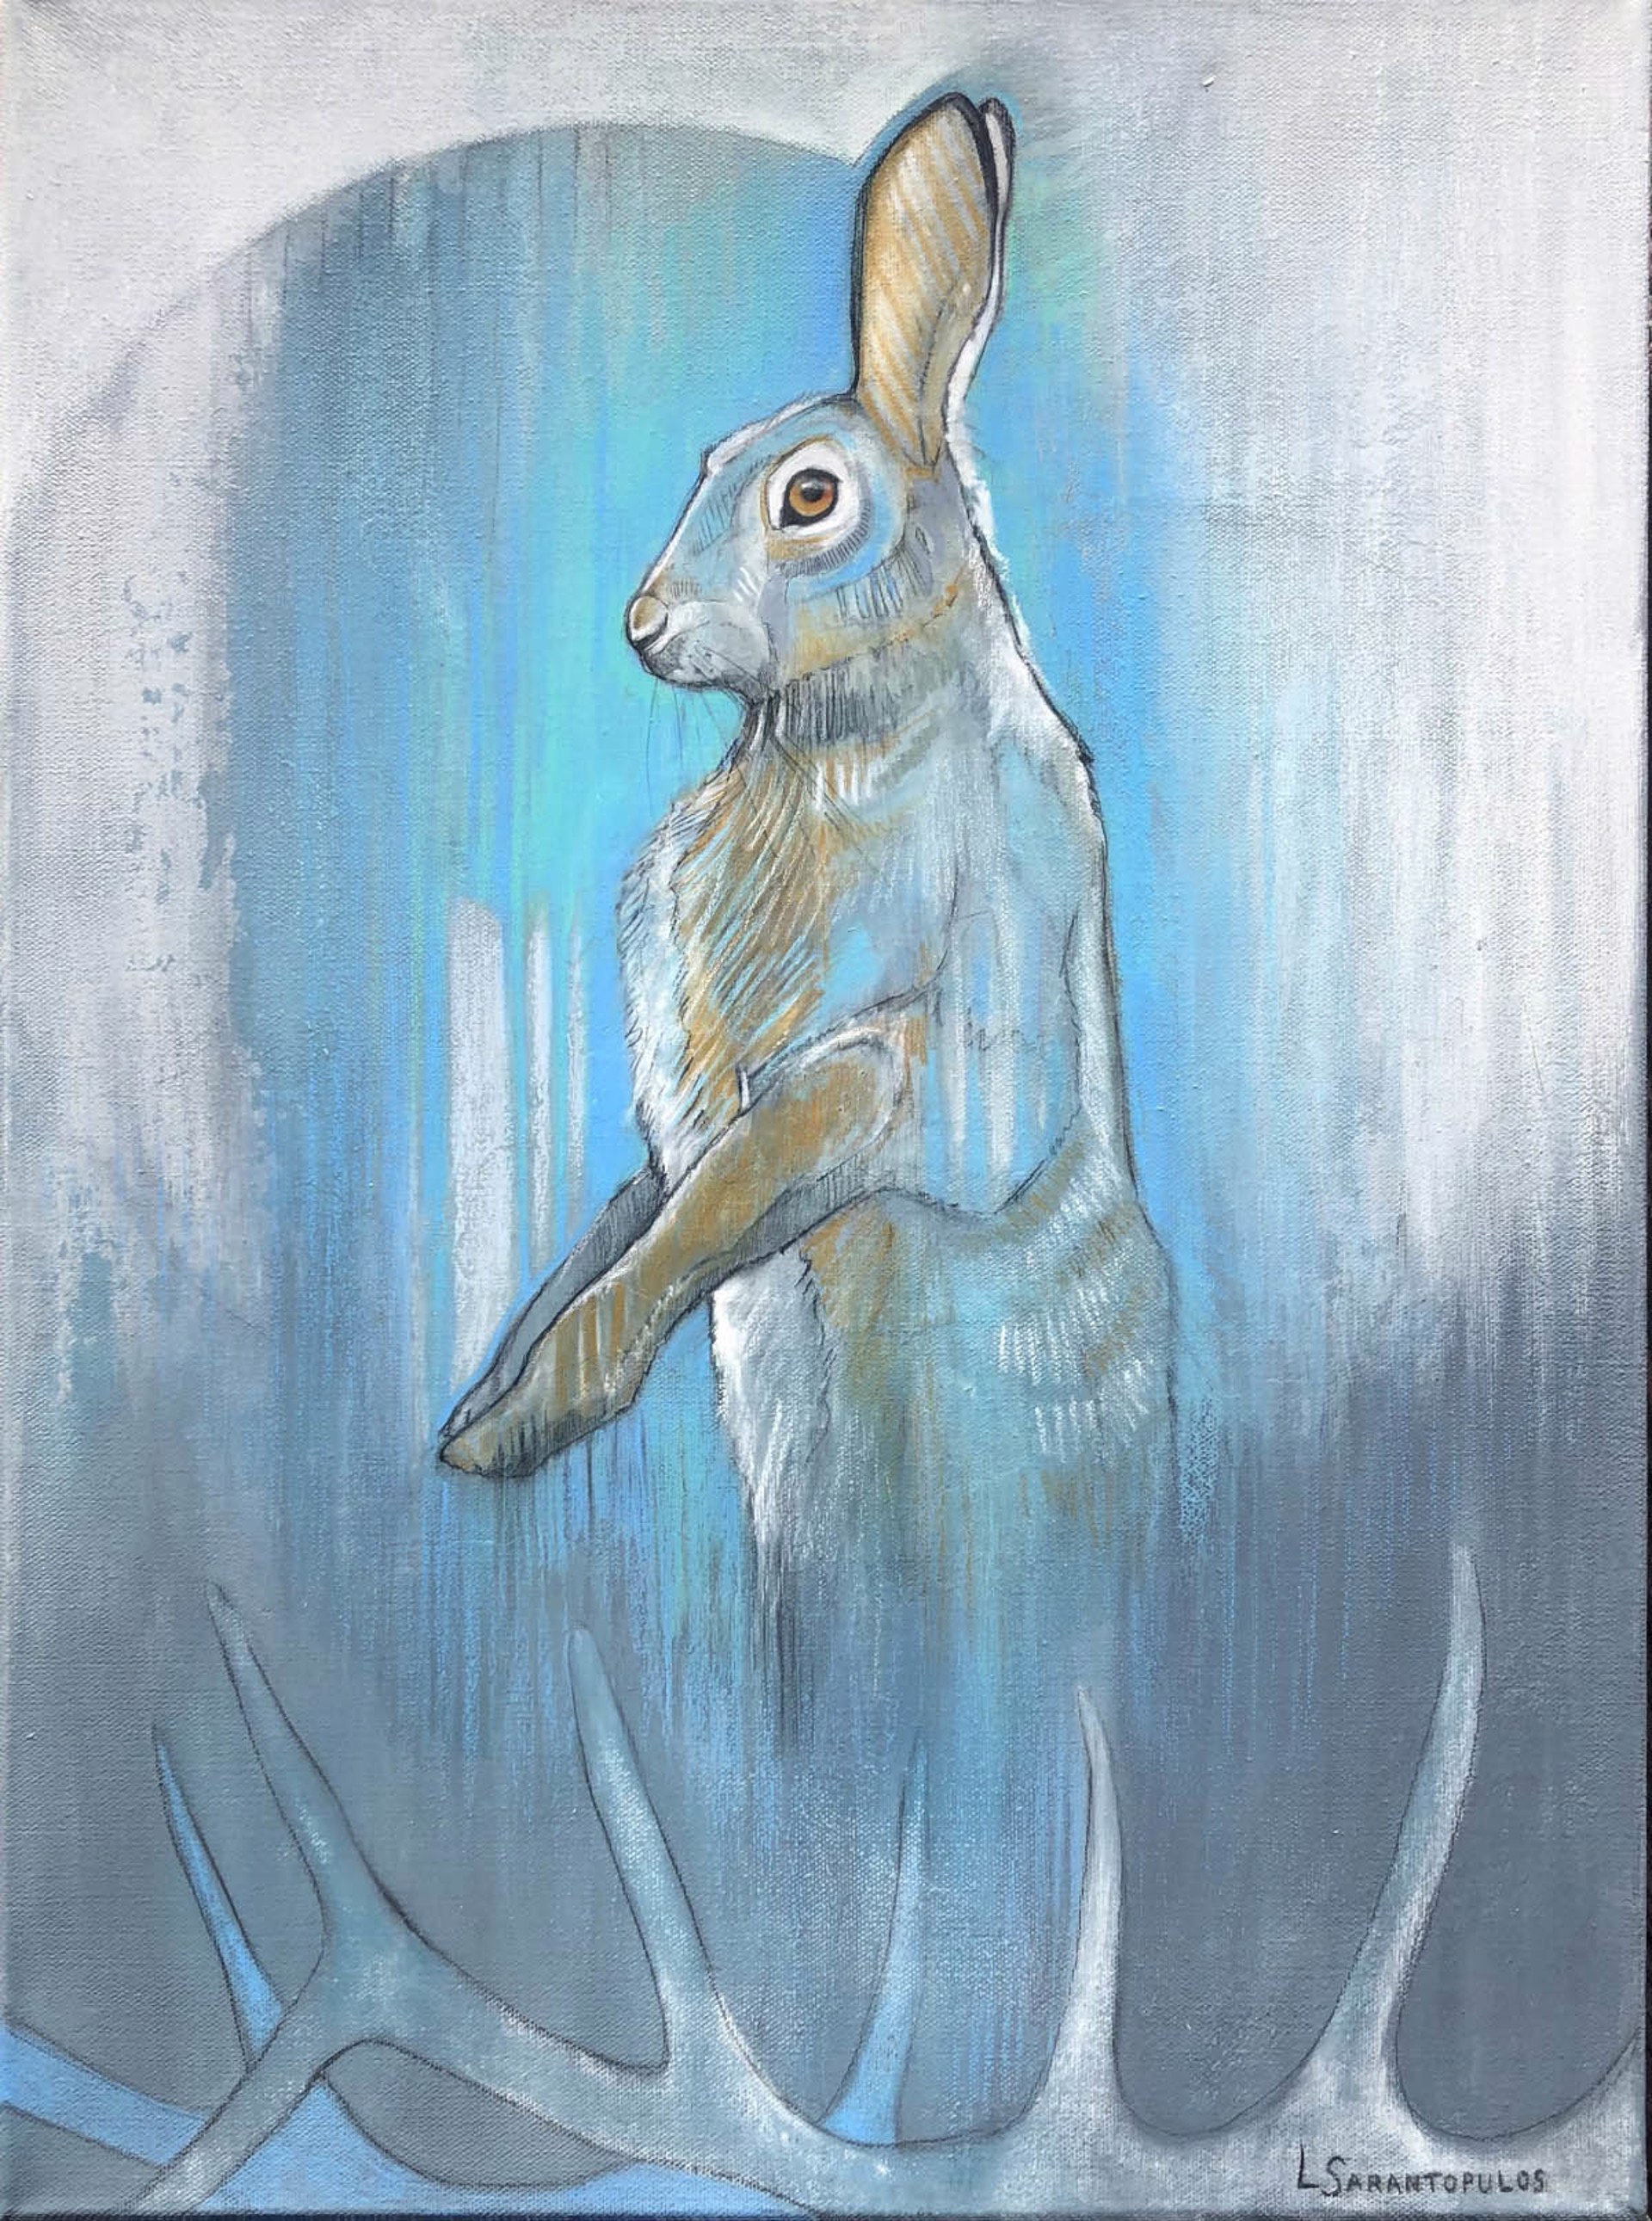 Original Mixed Media Painting Featuring A Jackalope With Antlers In Foreground Over Abstract Blue Background